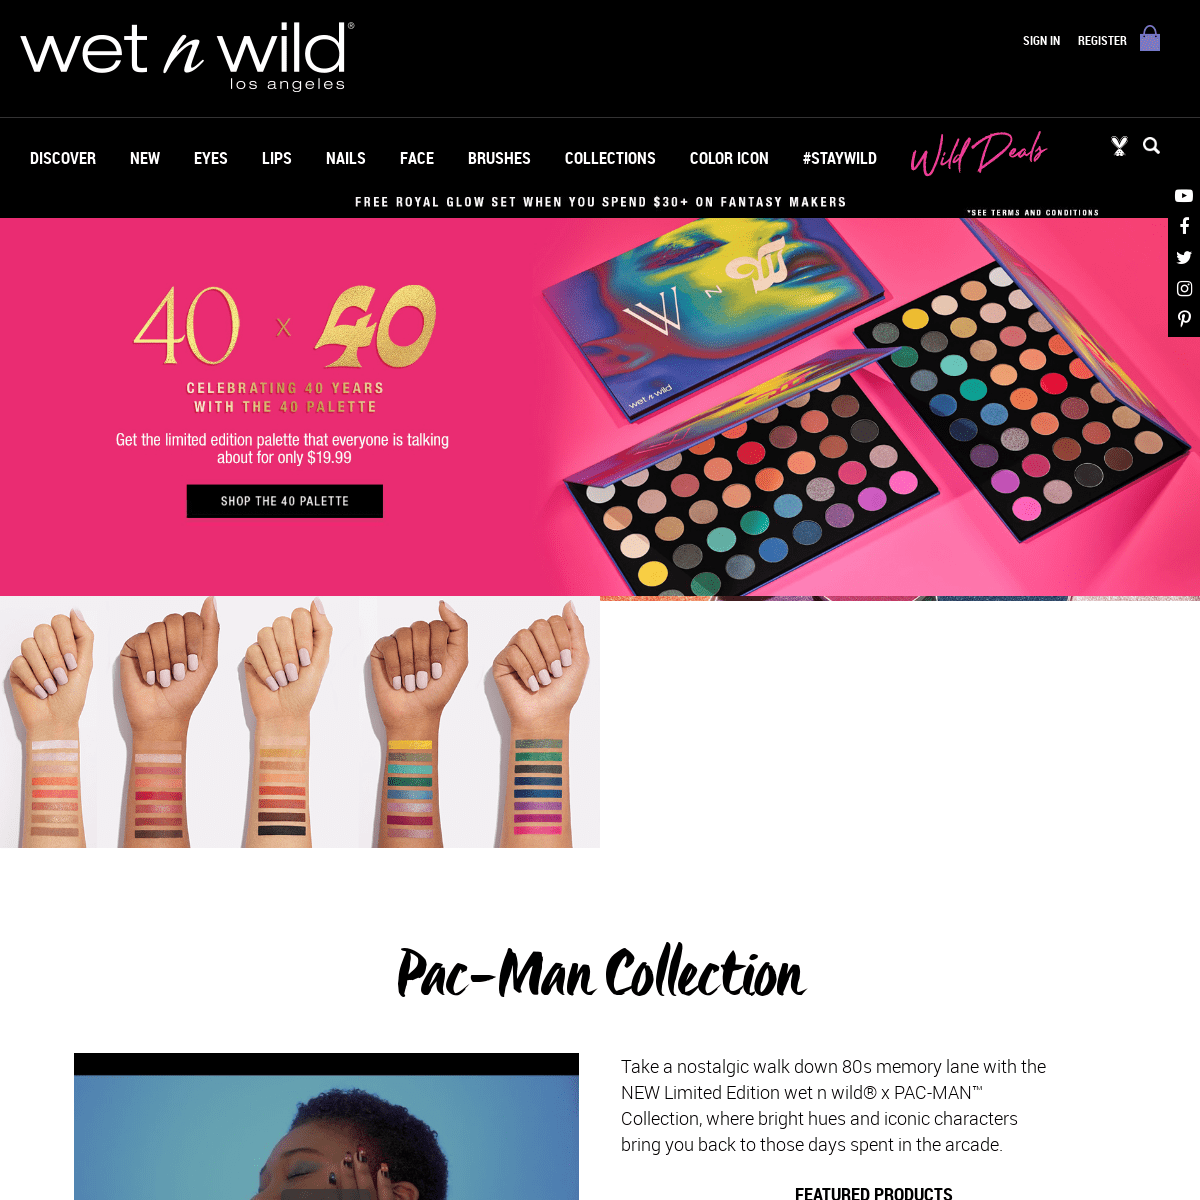 wet n wild Beauty | Stay Wild with Our Stunning Beauty Products